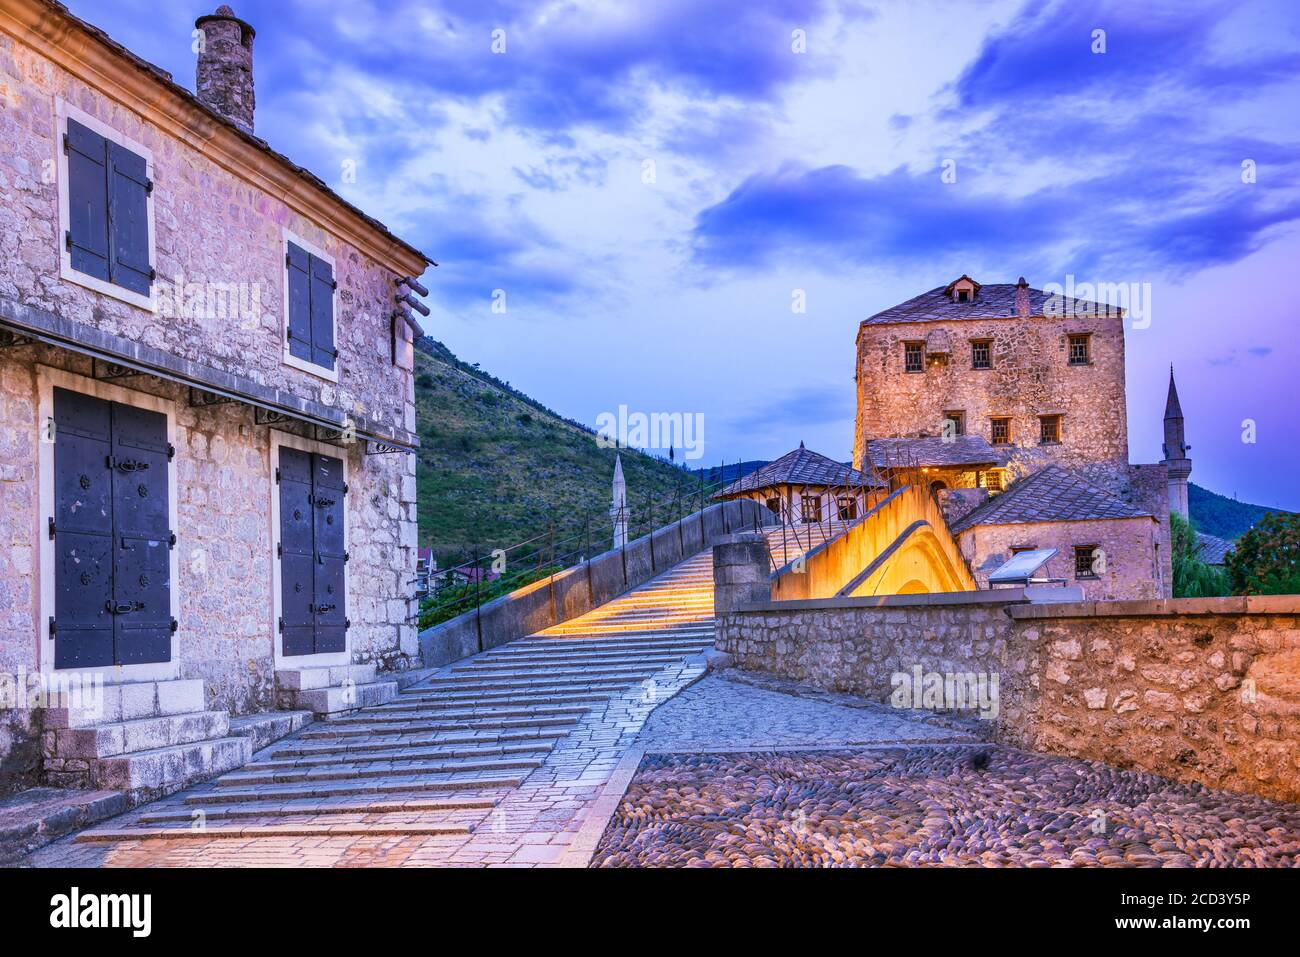 Mostar, Old Town, Bosnia and Herzegovina, Europe. Skyline of Mostar with the Stari Most Bridge, houses and minarets, at sunrise. Stock Photo